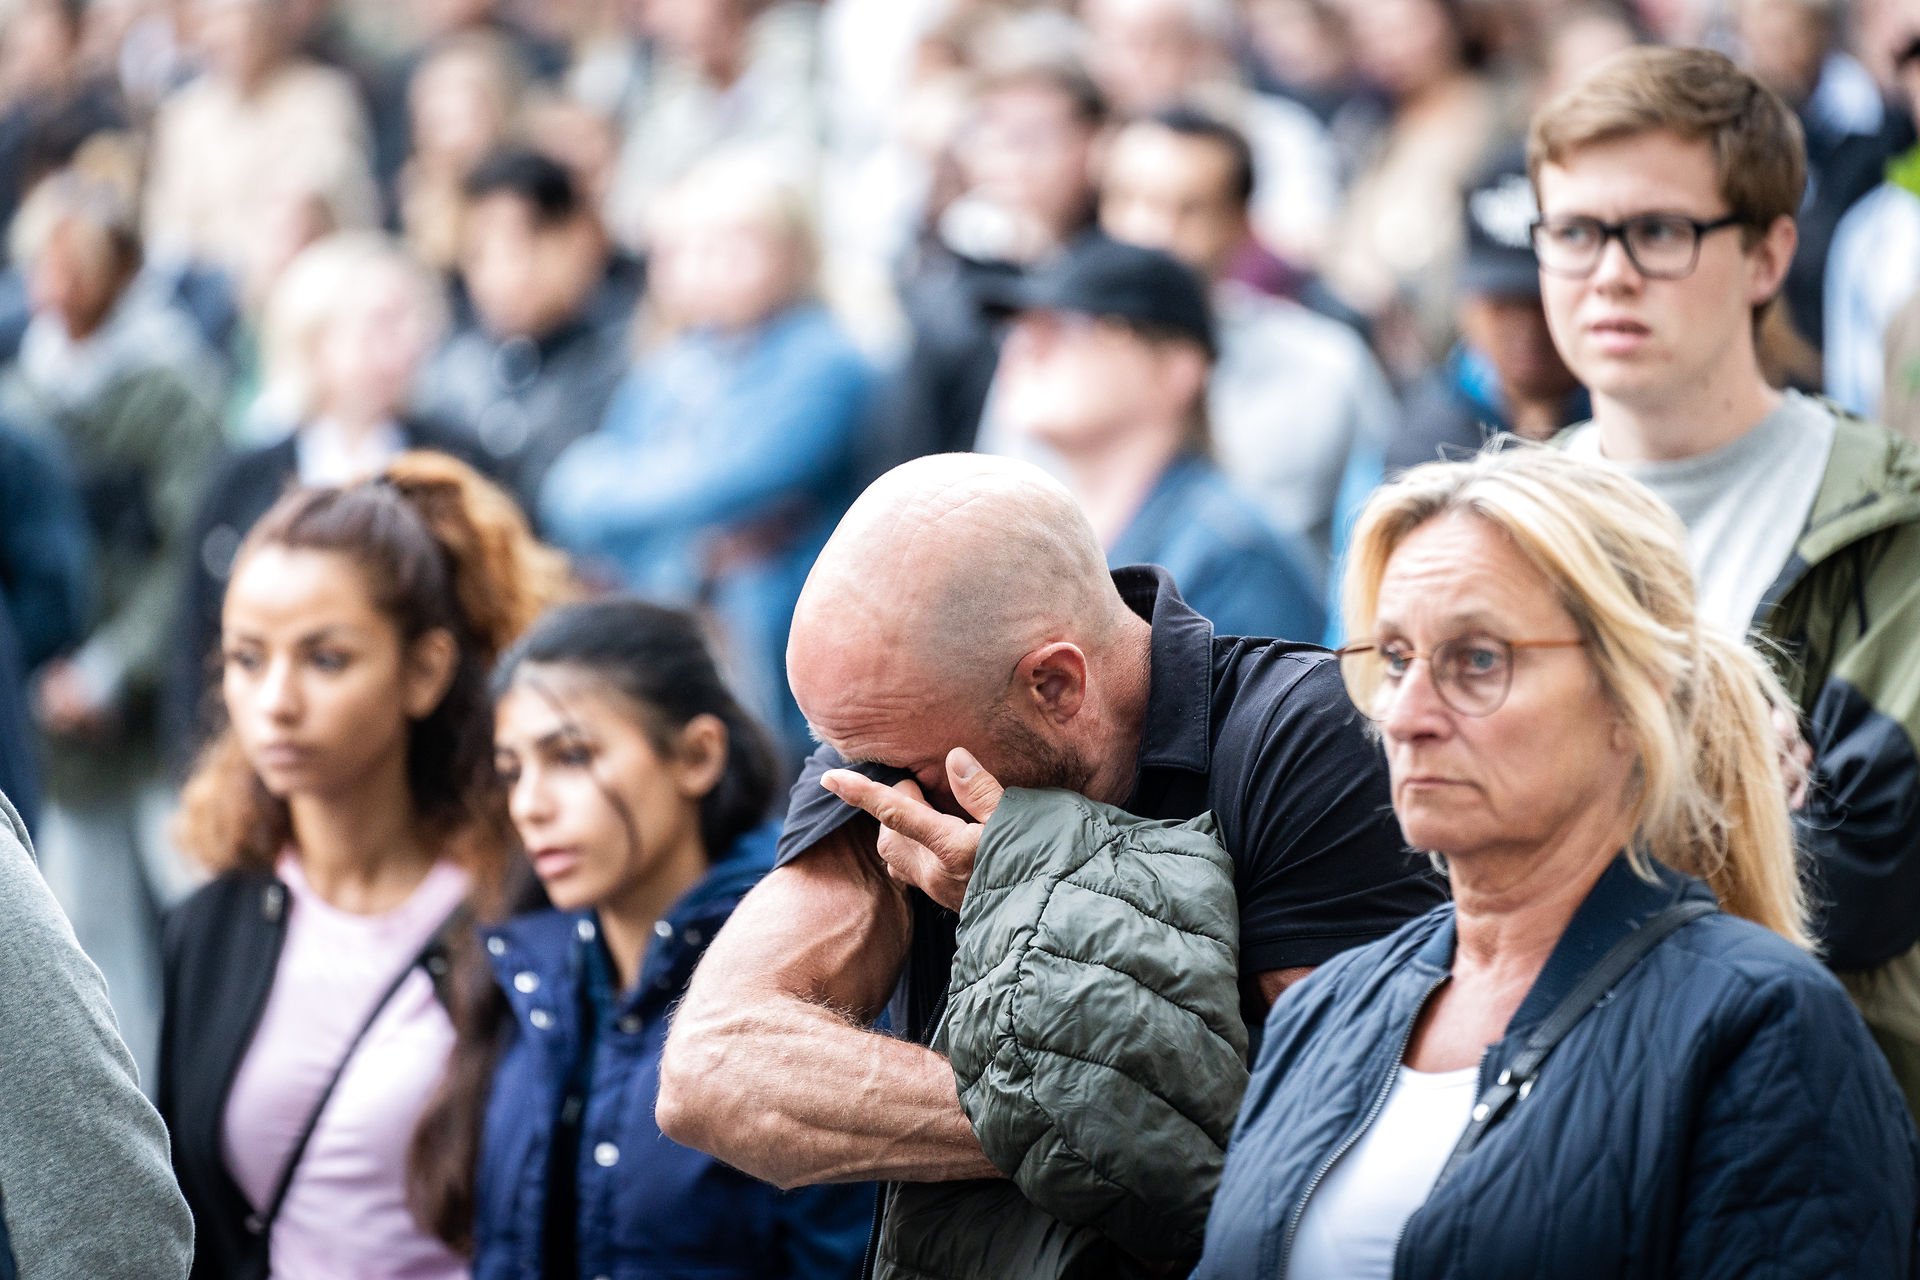 A memorial service for the victims of the Copenhagen shooting, on 5th July 2022